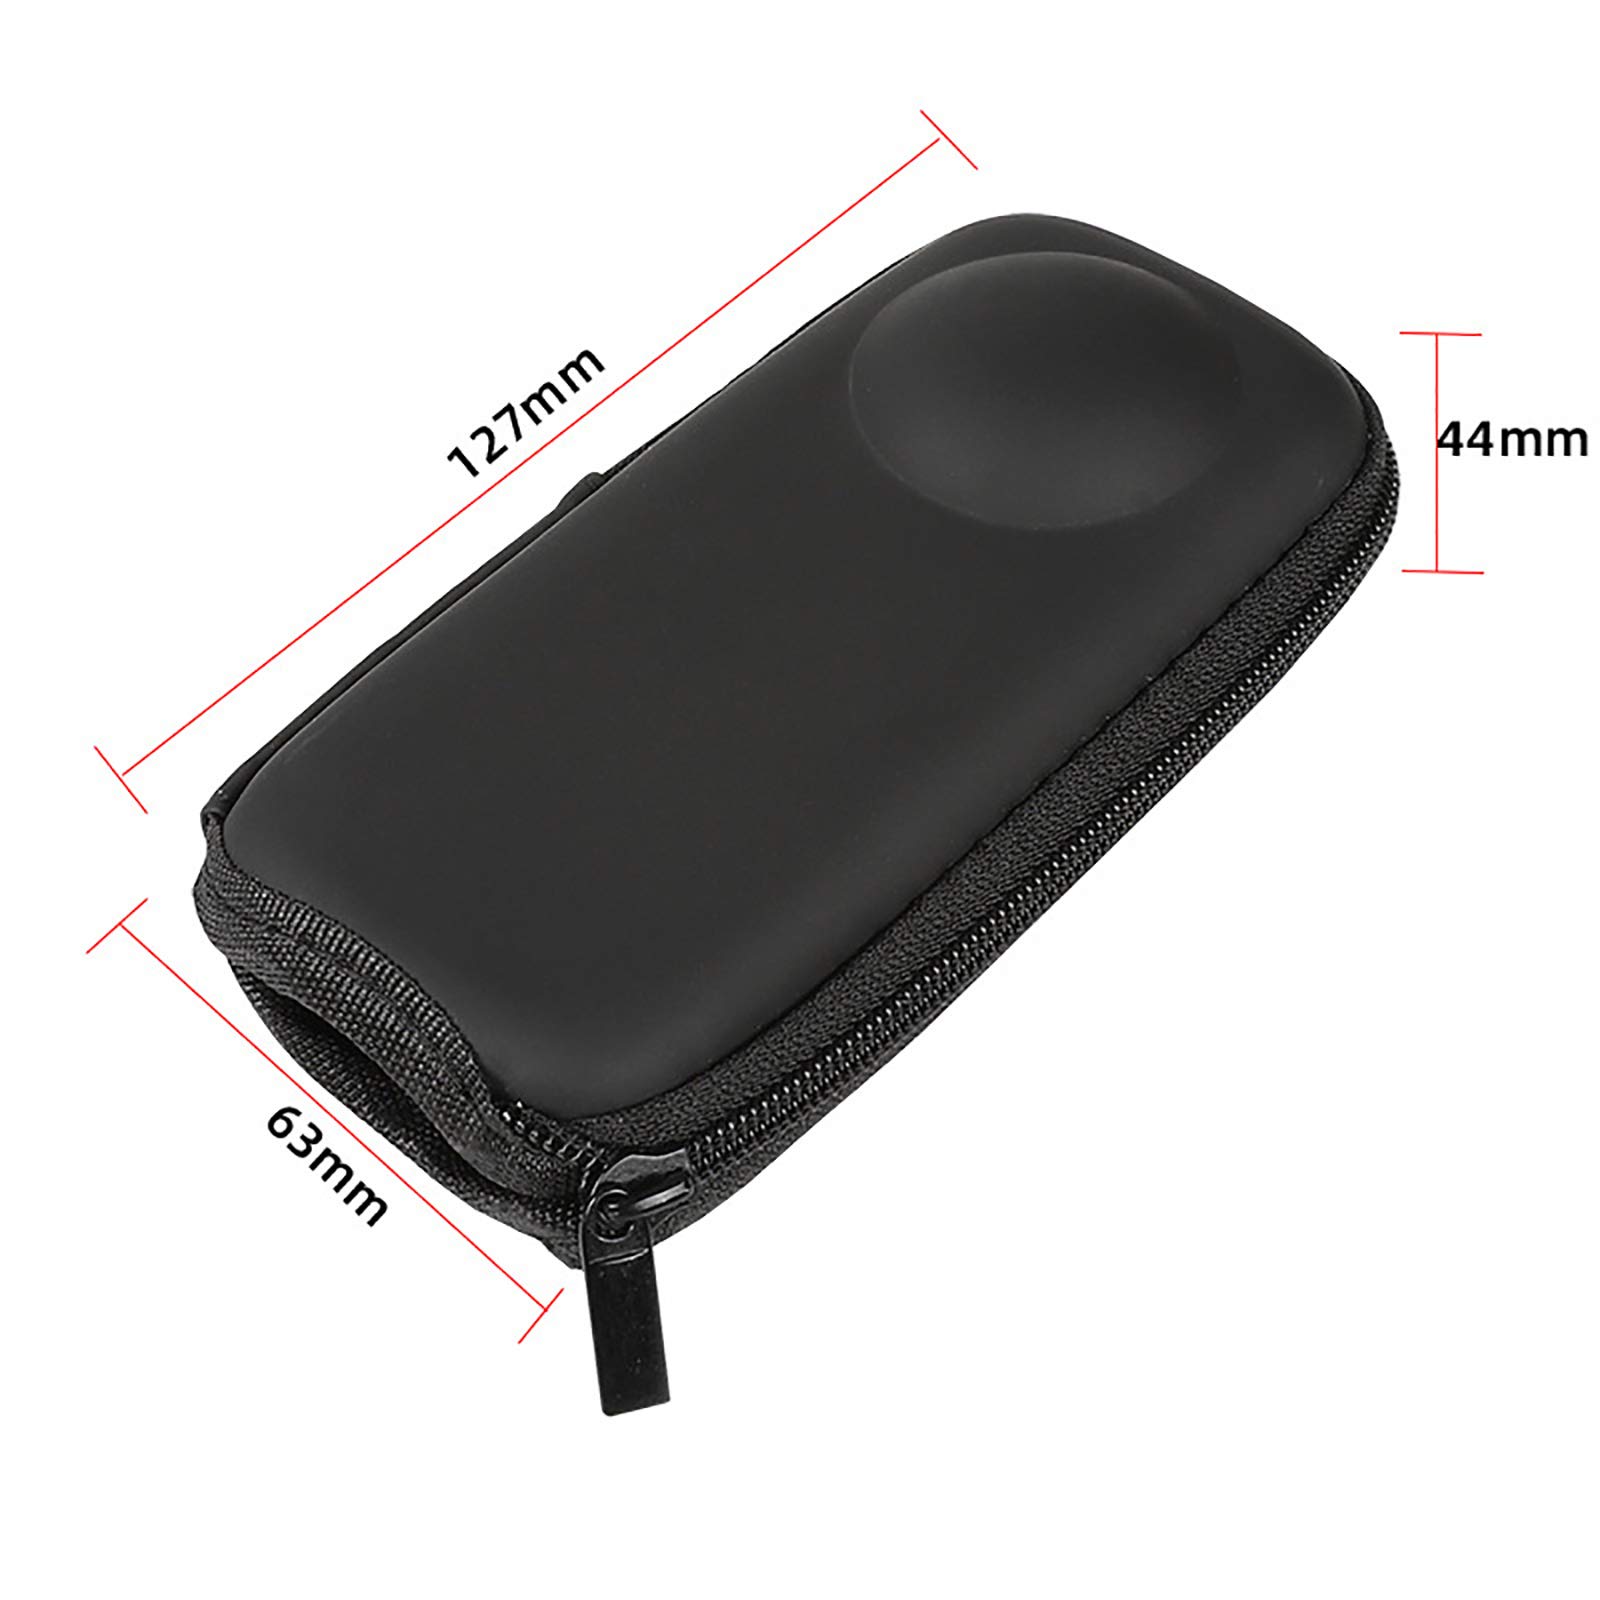 LICHIFIT Portable Carrying Case Storage Bag for Insta360 One X3/One X2/One X Action Camera Water-resistance Mini Protective Hard PU Shell Box Accessories